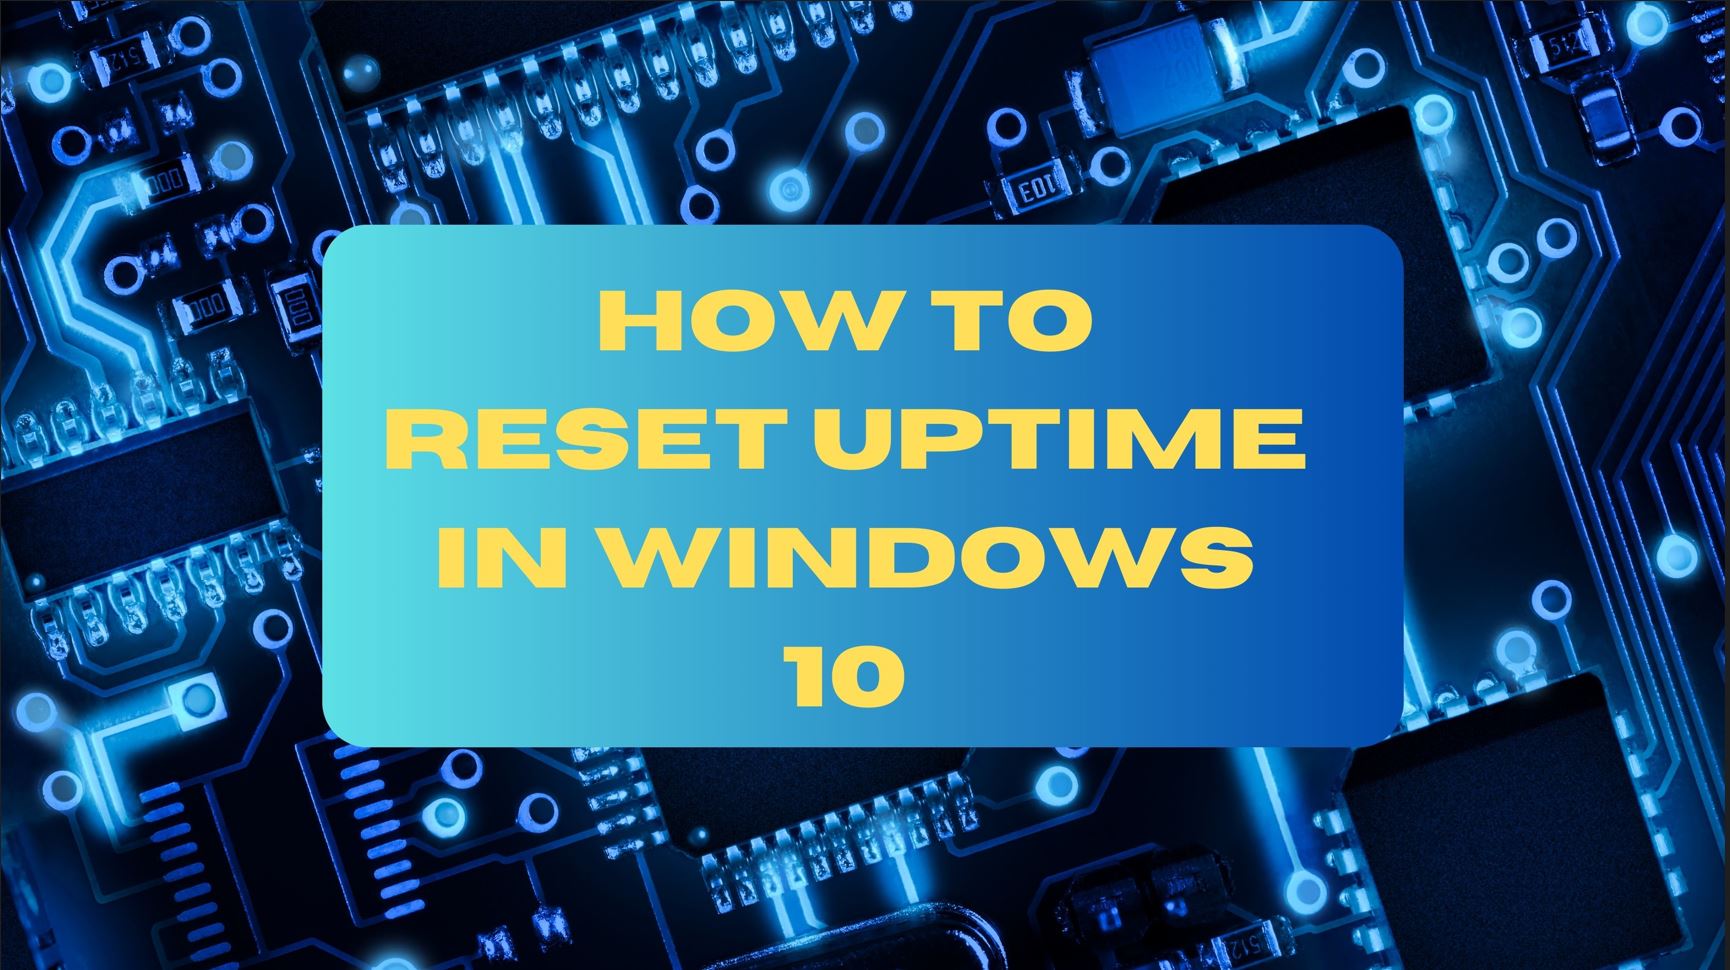 How to Reset uptime in windows 10